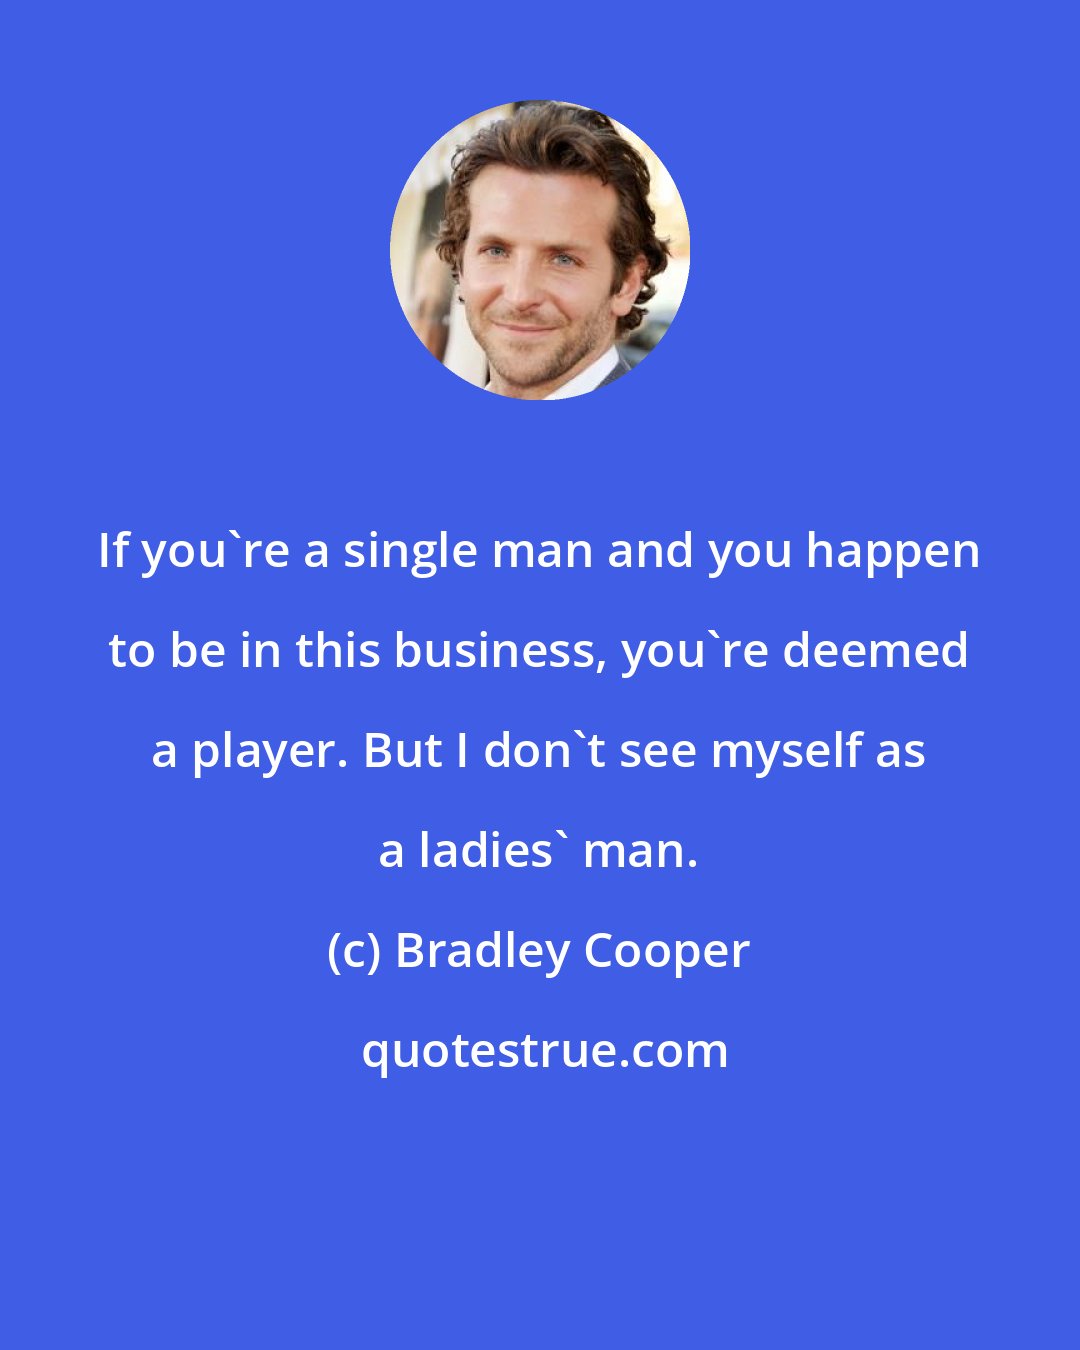 Bradley Cooper: If you're a single man and you happen to be in this business, you're deemed a player. But I don't see myself as a ladies' man.